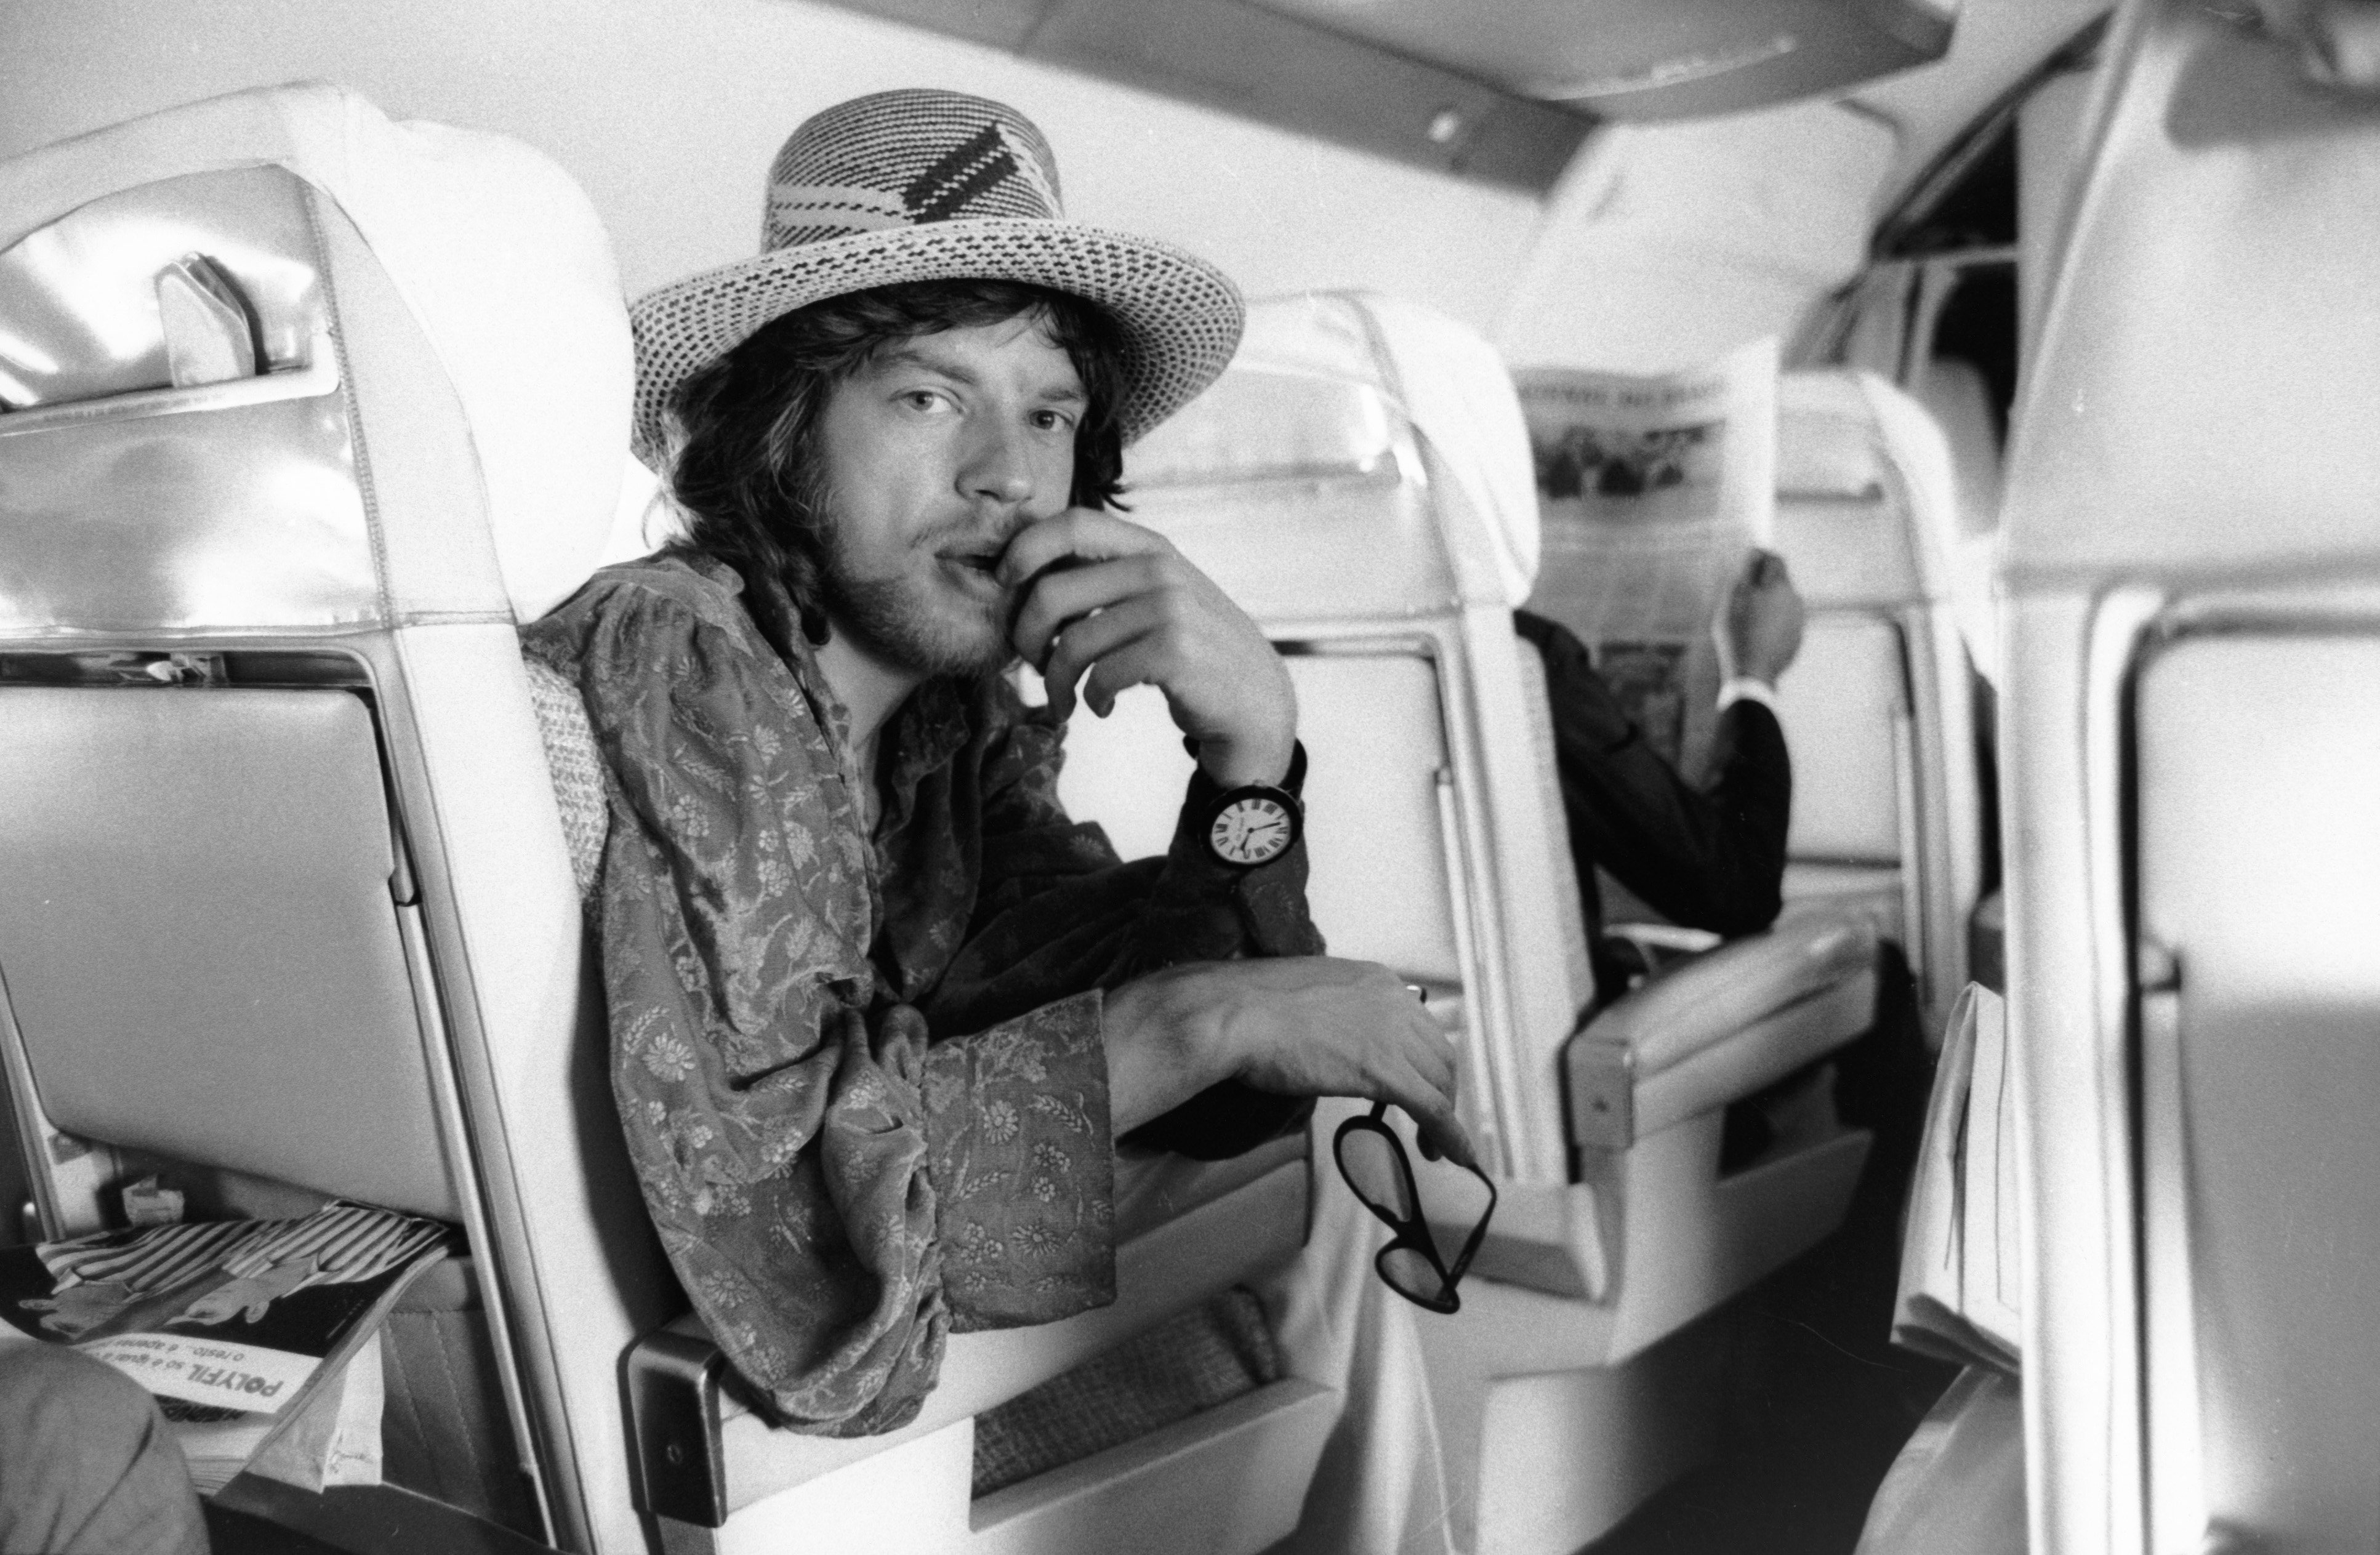 Mick Jagger sitting in a plane